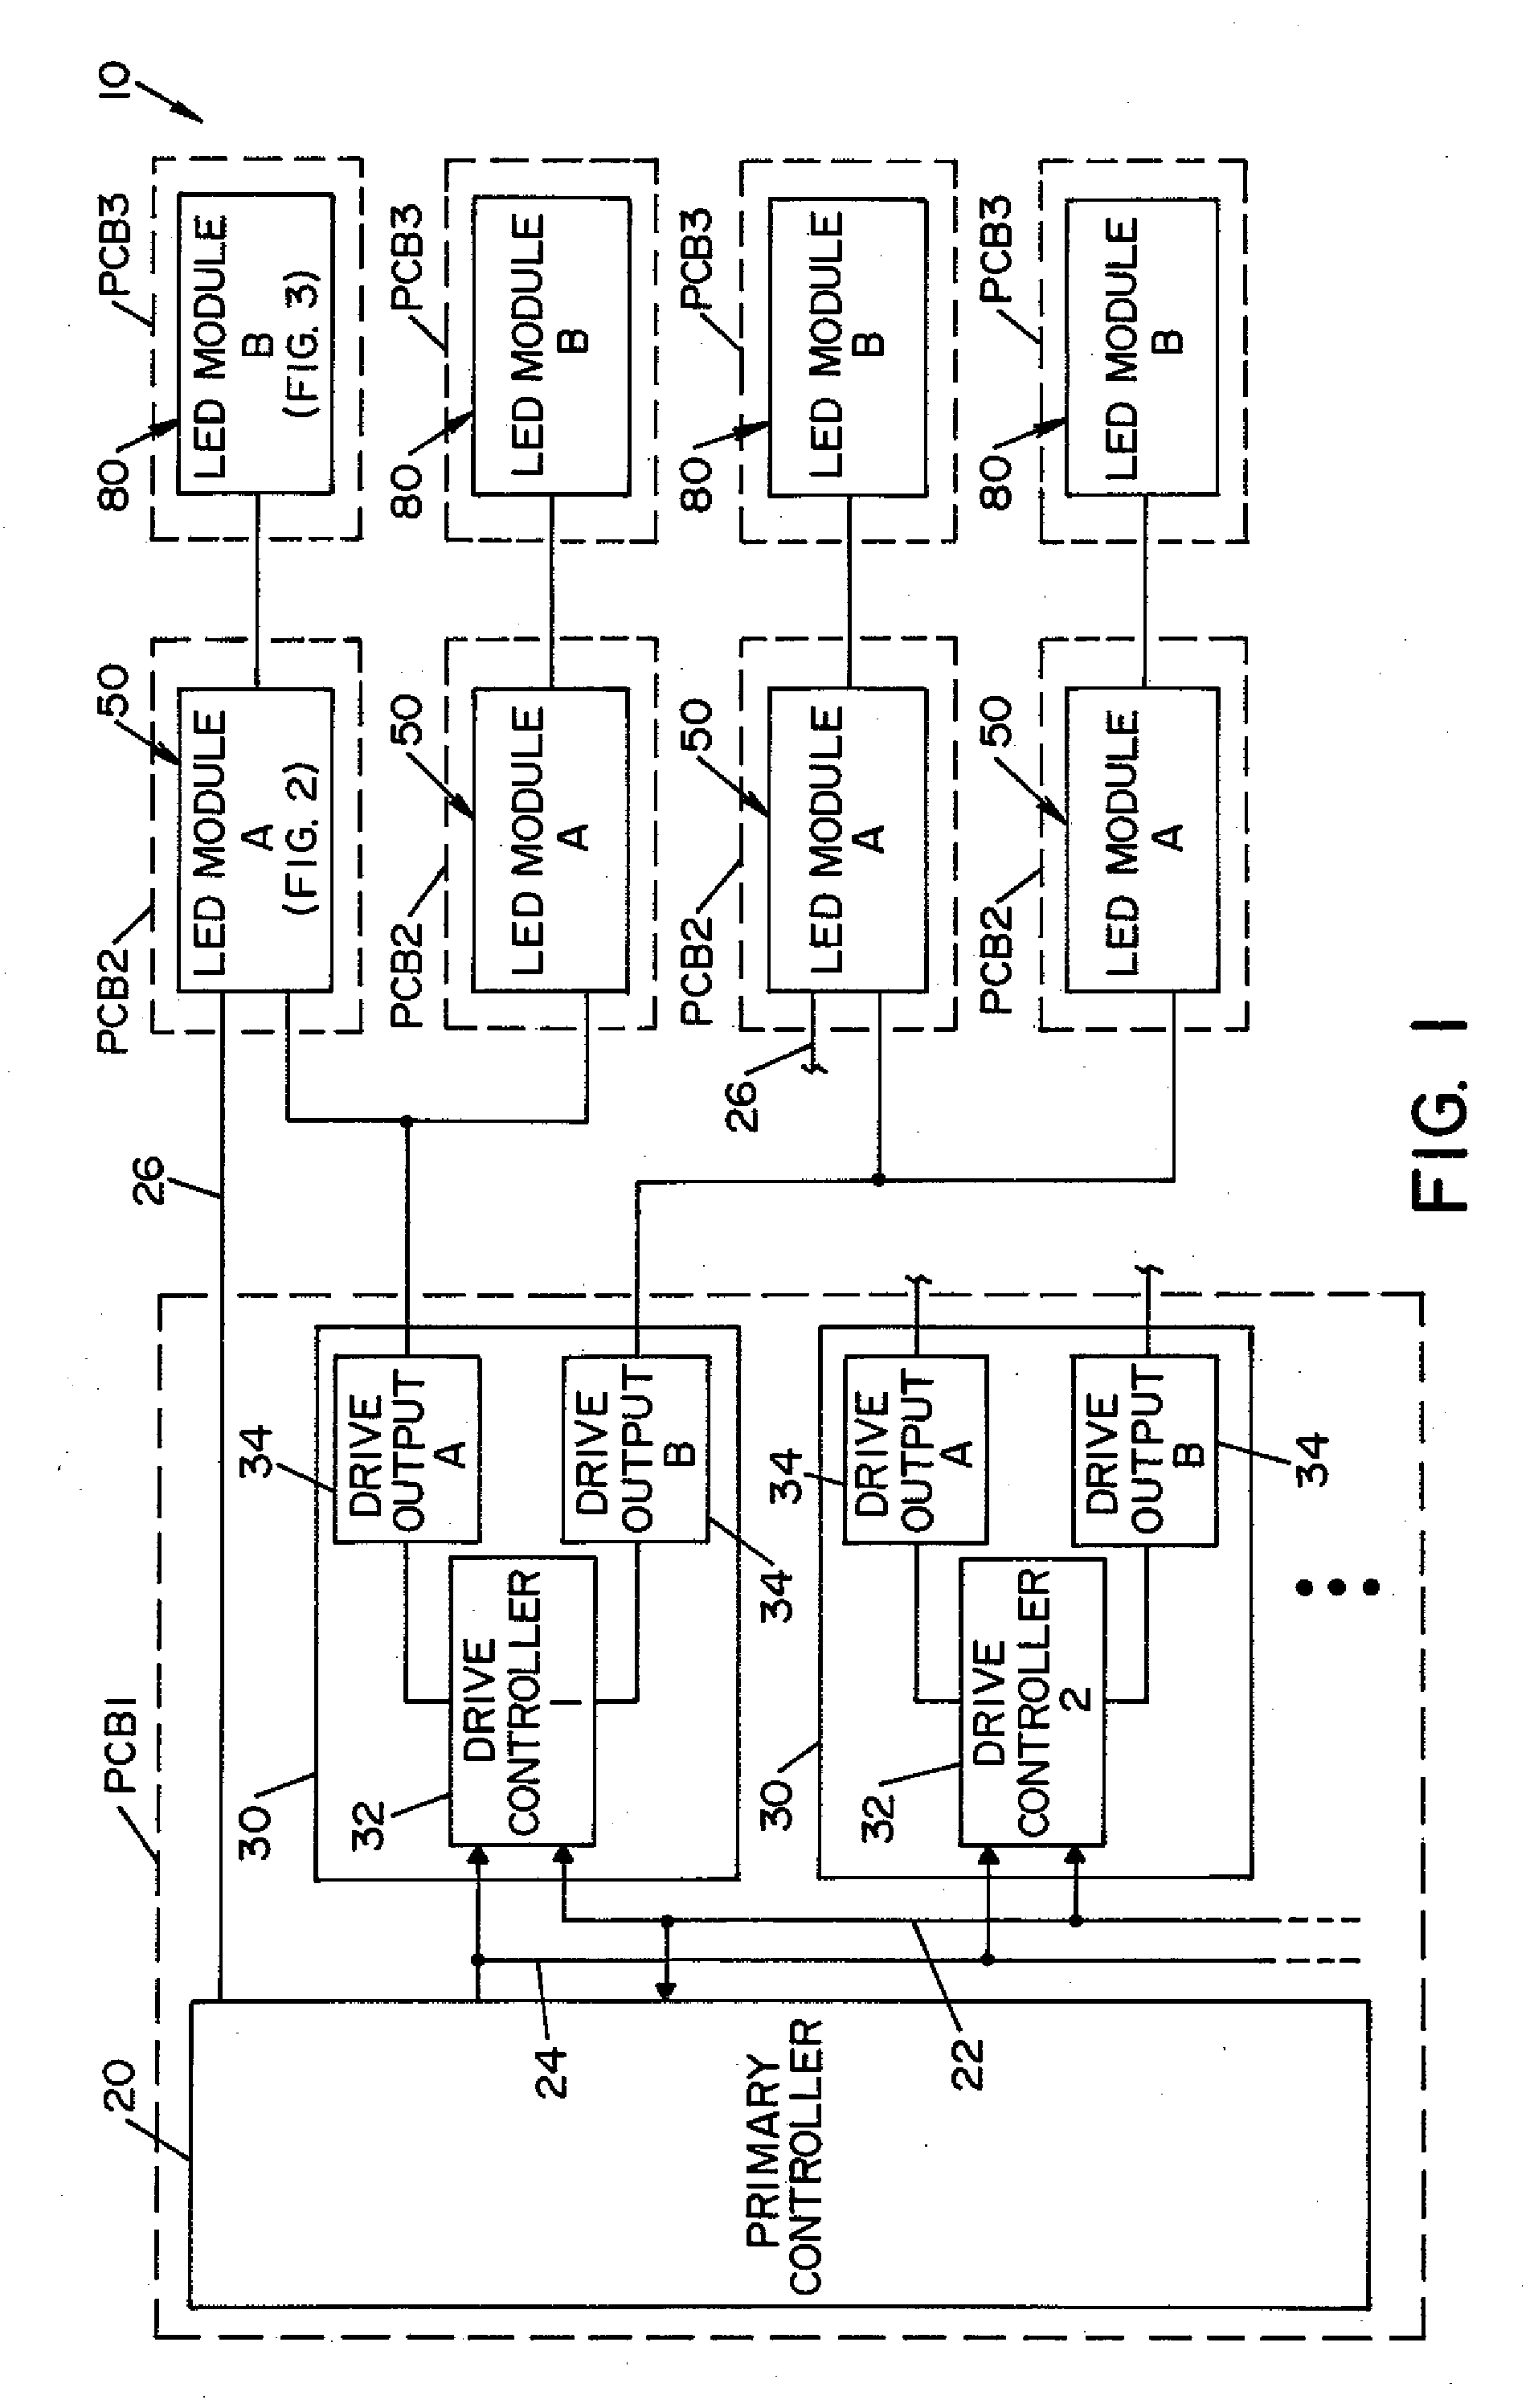 Lighting control system for a lighting device